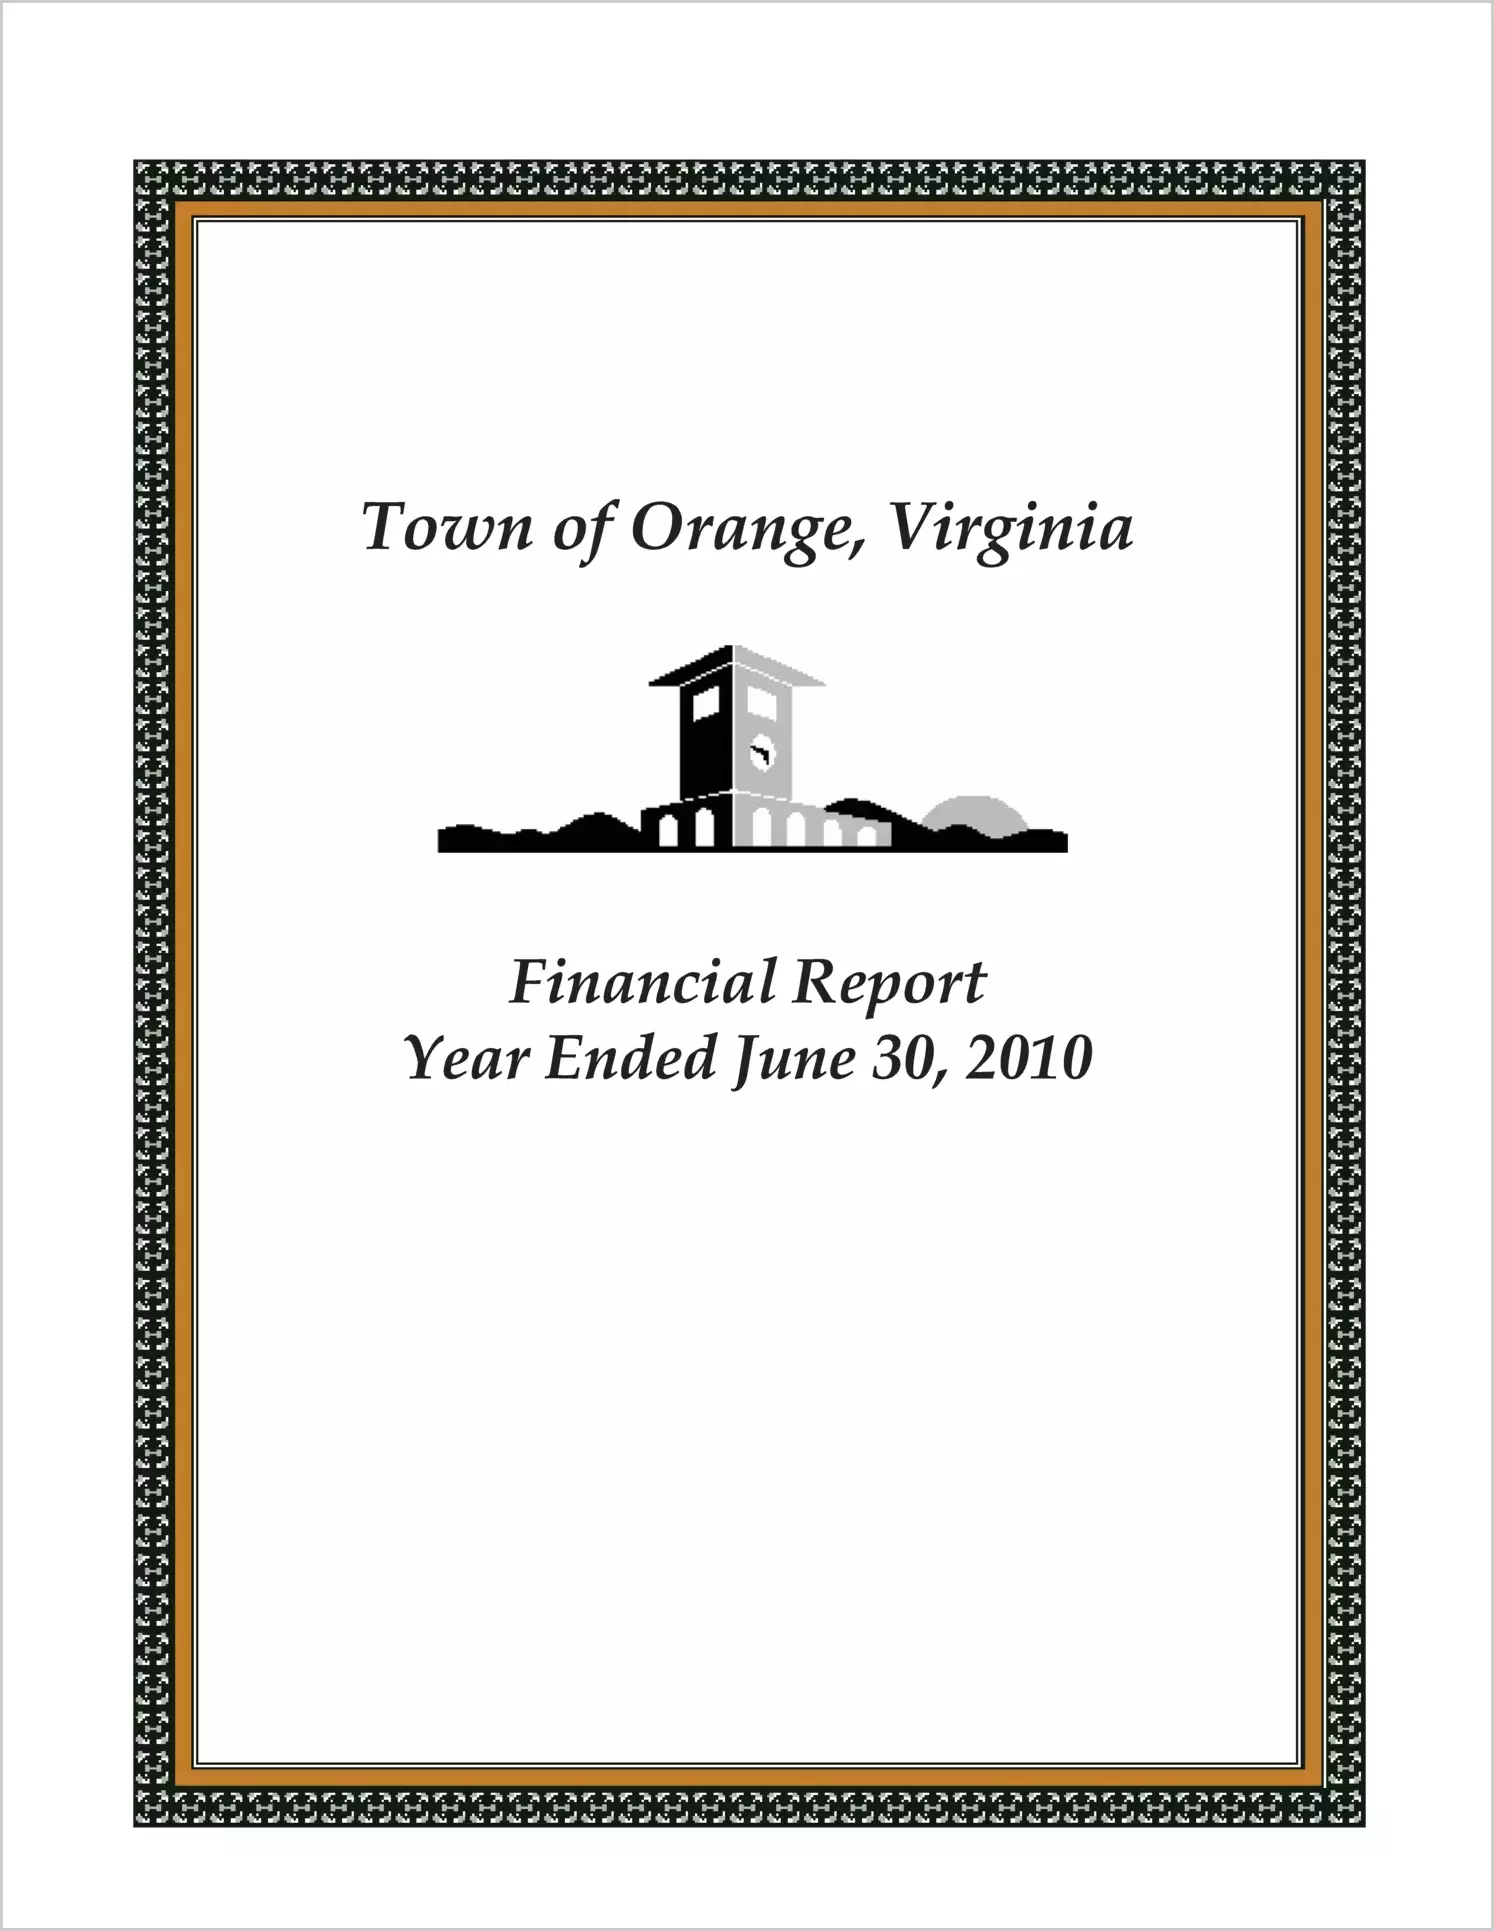 2010 Annual Financial Report for Town of Orange